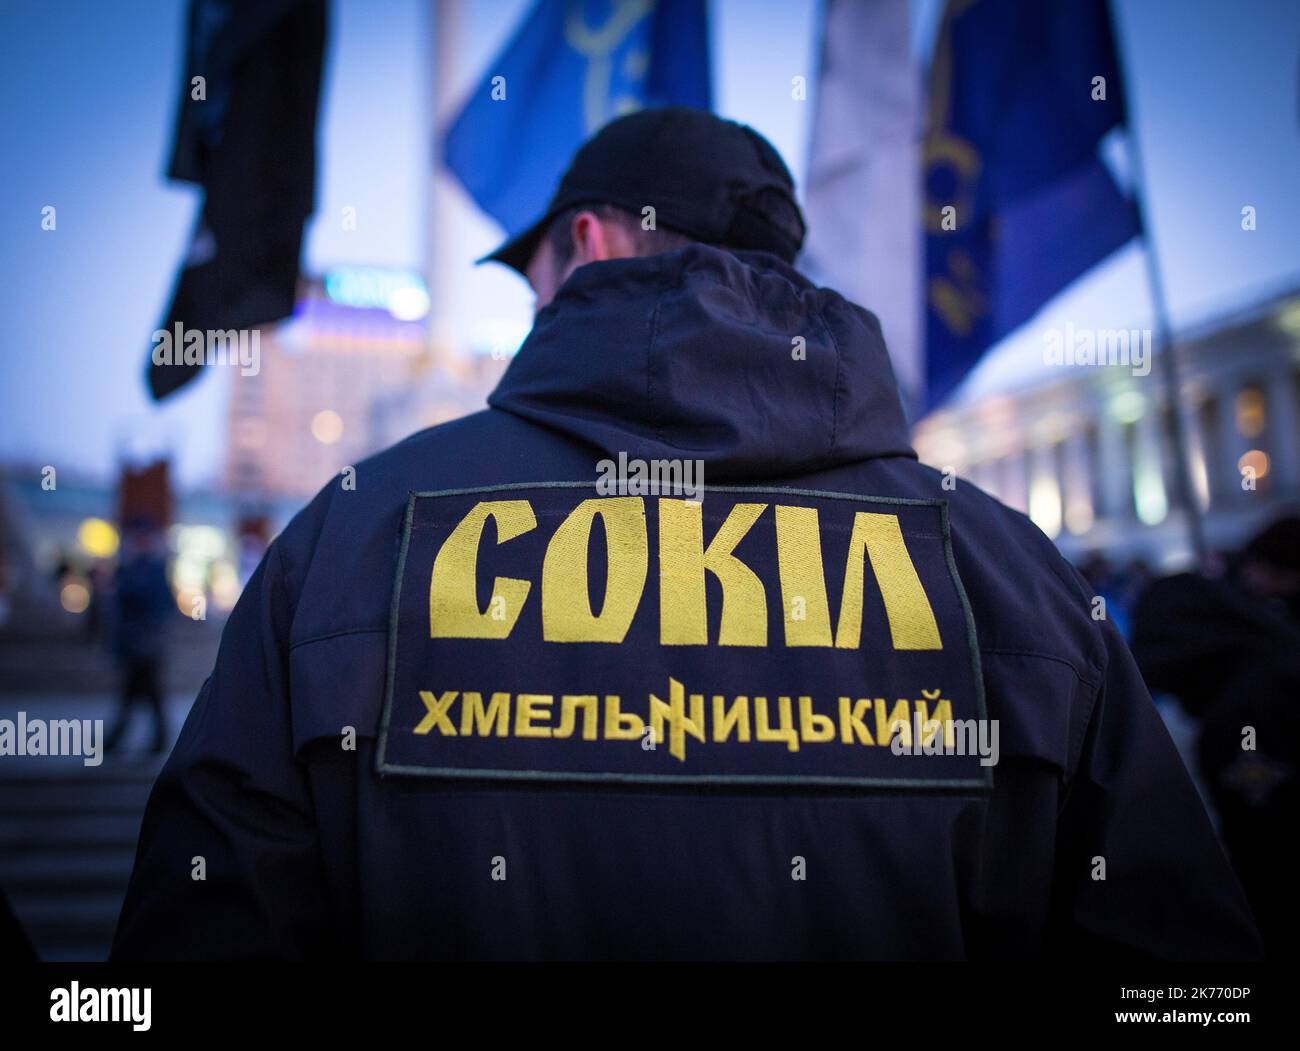 Members and sympathizers of the -Sokil-, -Sector Law- and other nationalist organizations marched through the streets of Kiev. Sokil is a sports and military society for youth that aims to develop the Ukrainian society and state on the basis of modern Ukrainian social nationalism. Stock Photo